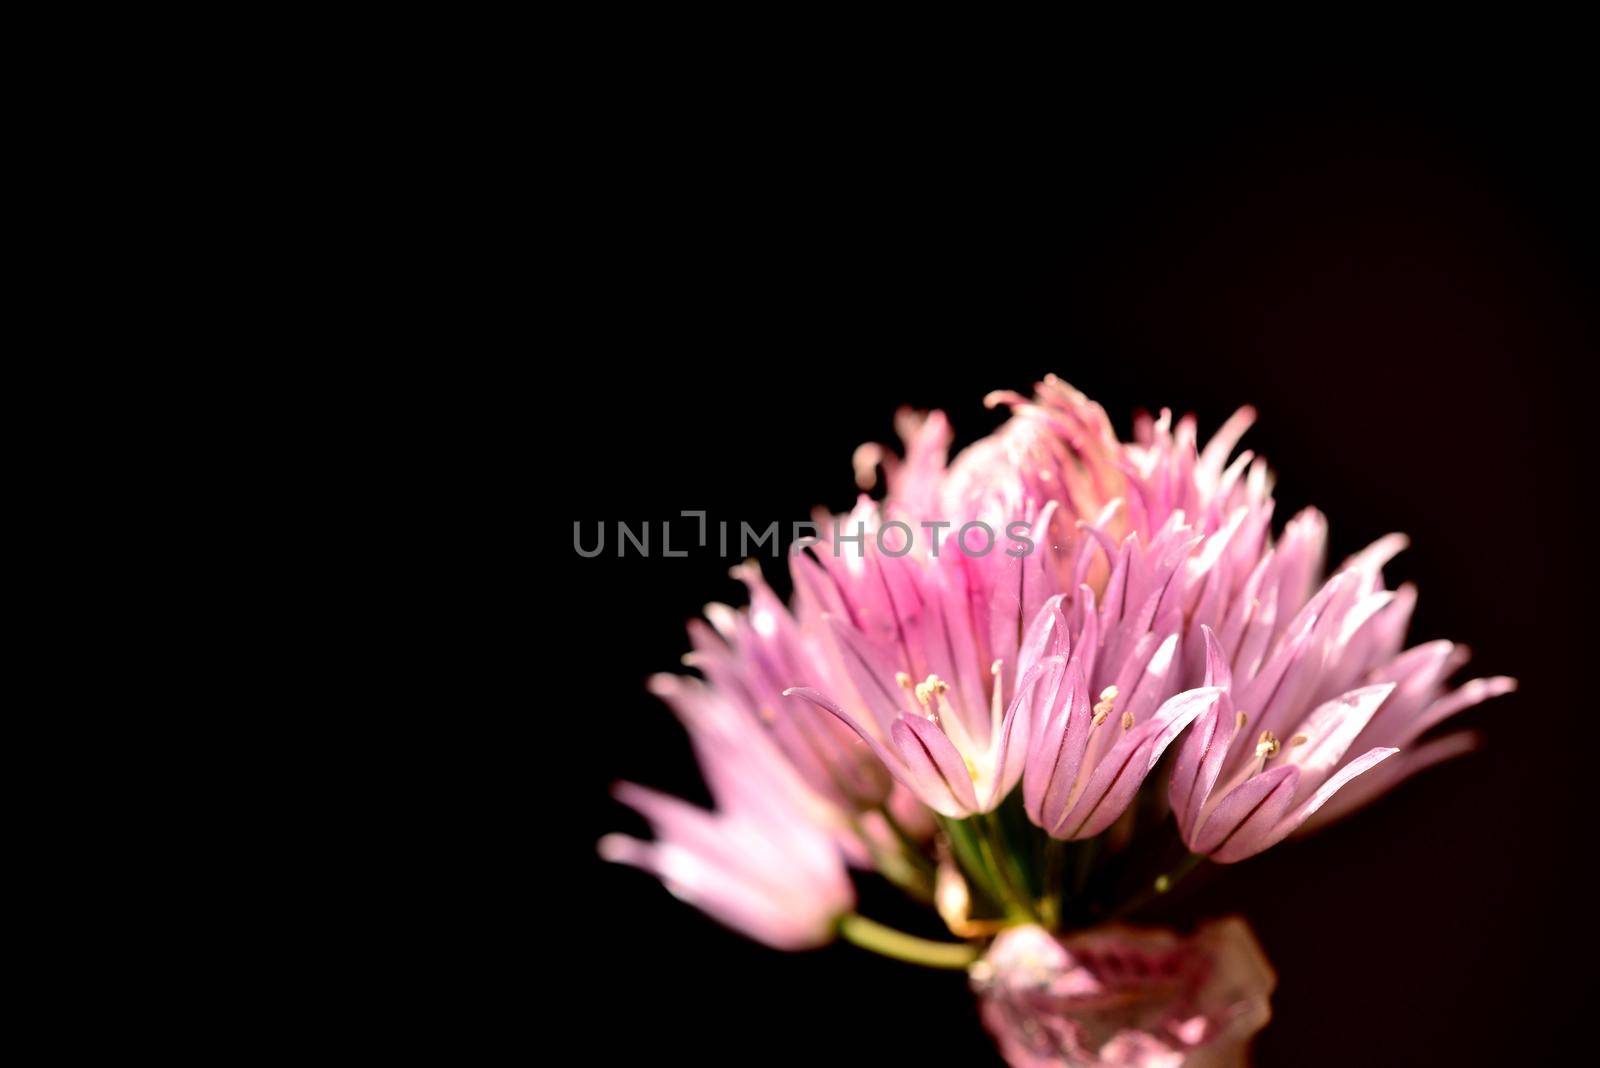 Blooming chive, closeup of the flower of the kitchen herb by Jochen